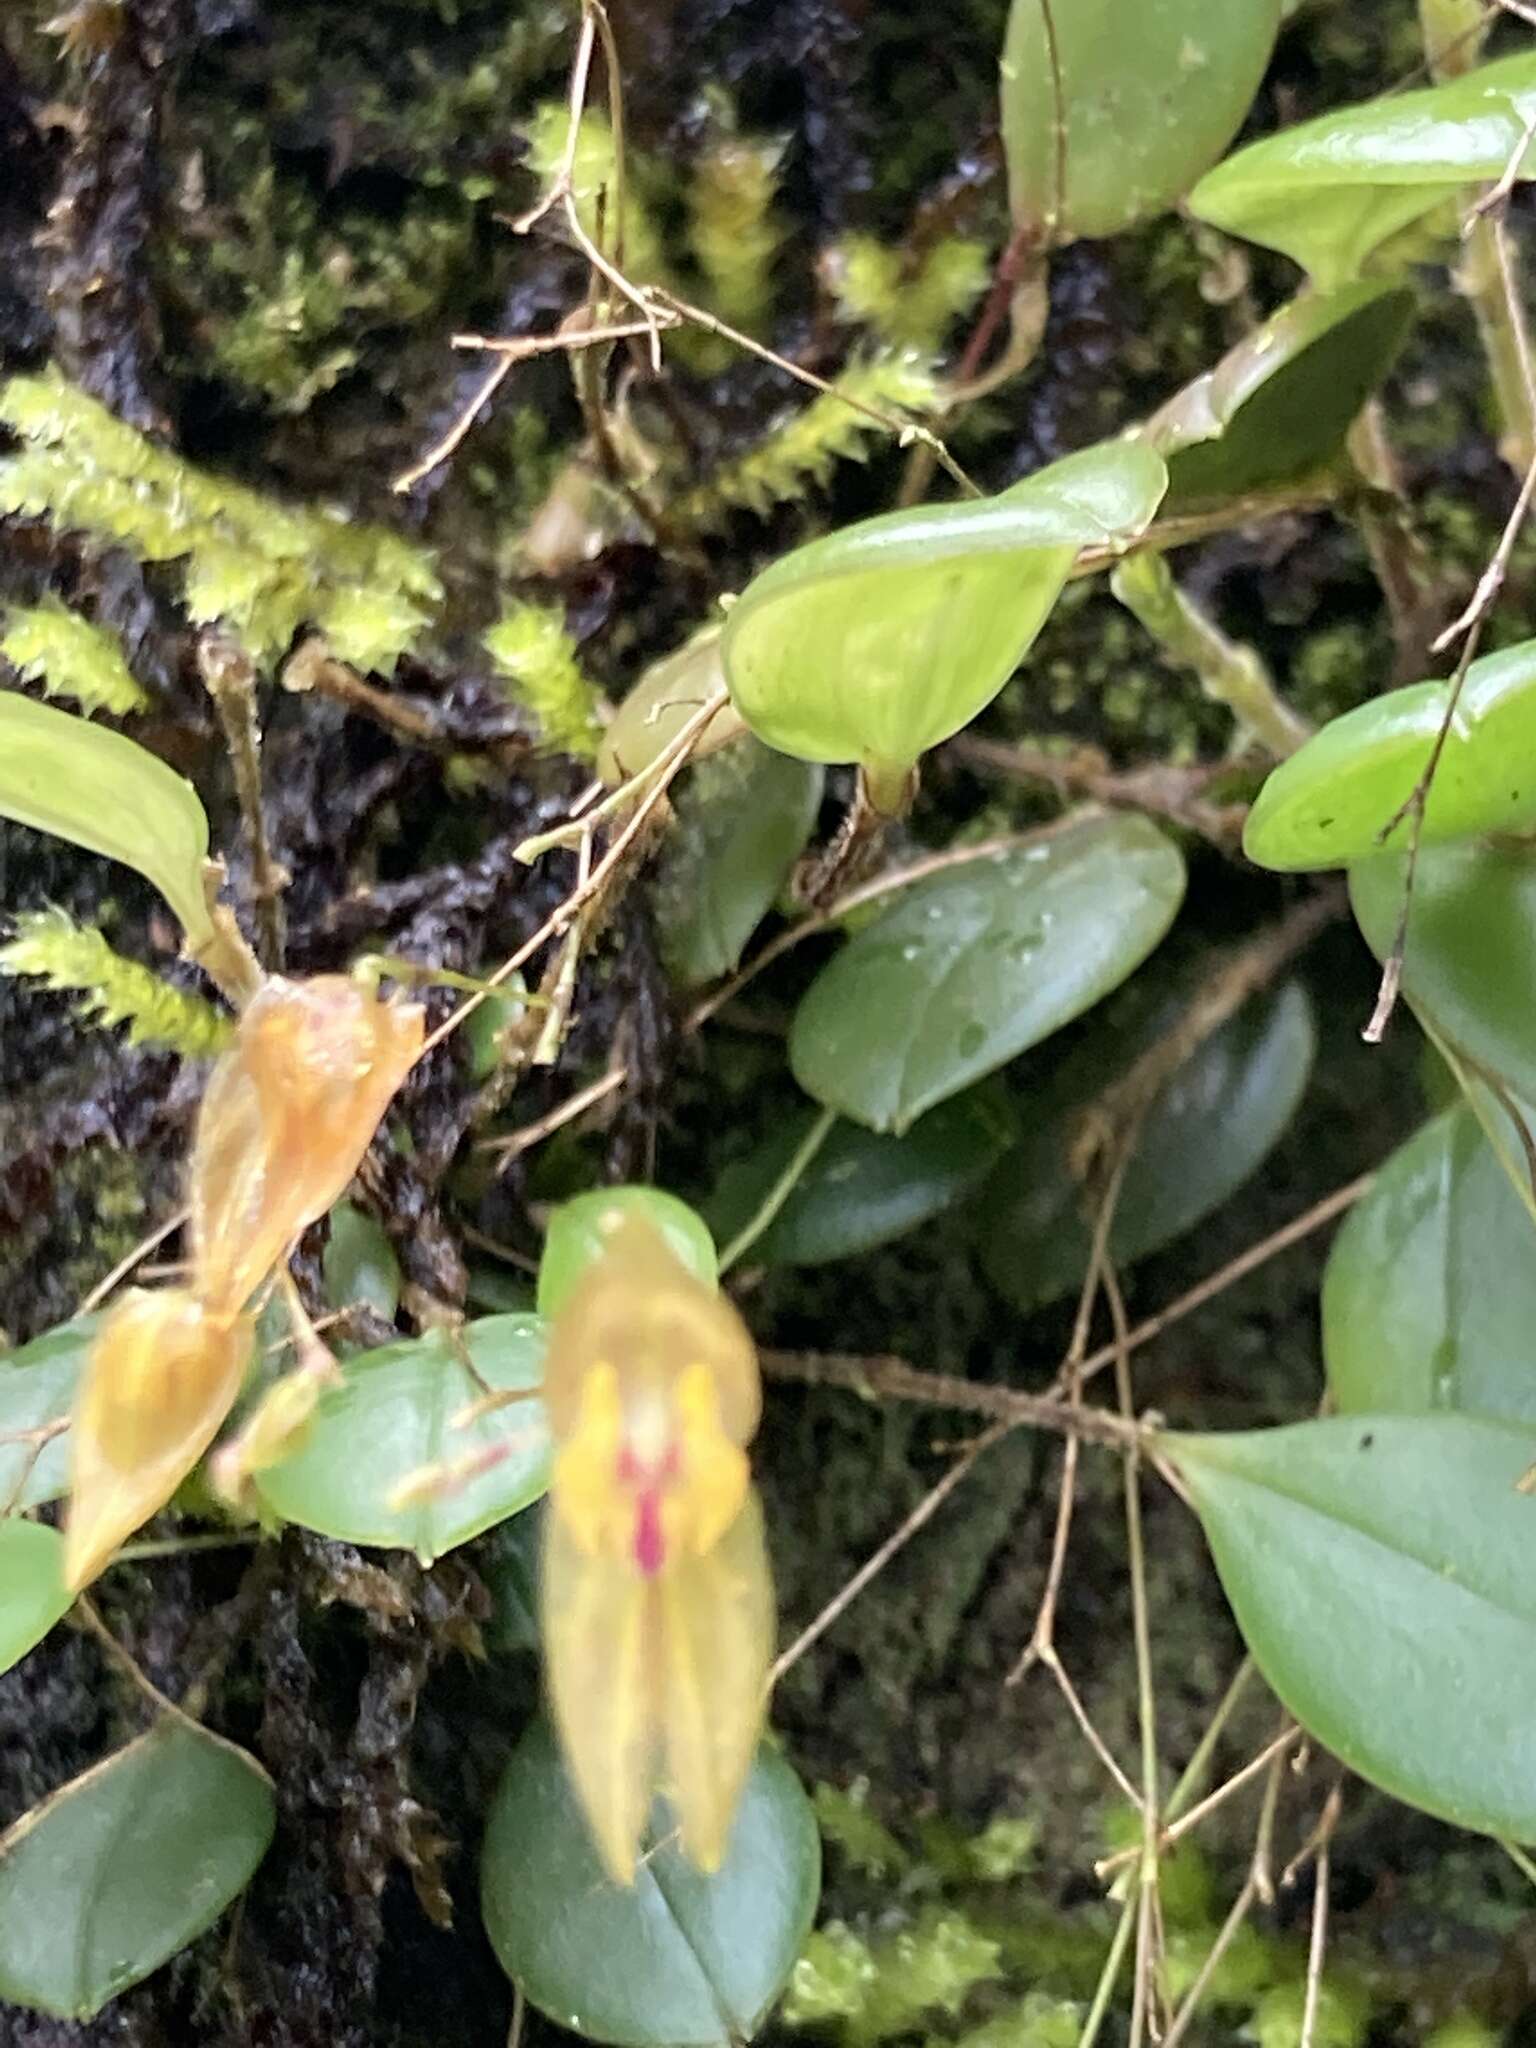 Image of Lepanthes effusa Schltr.